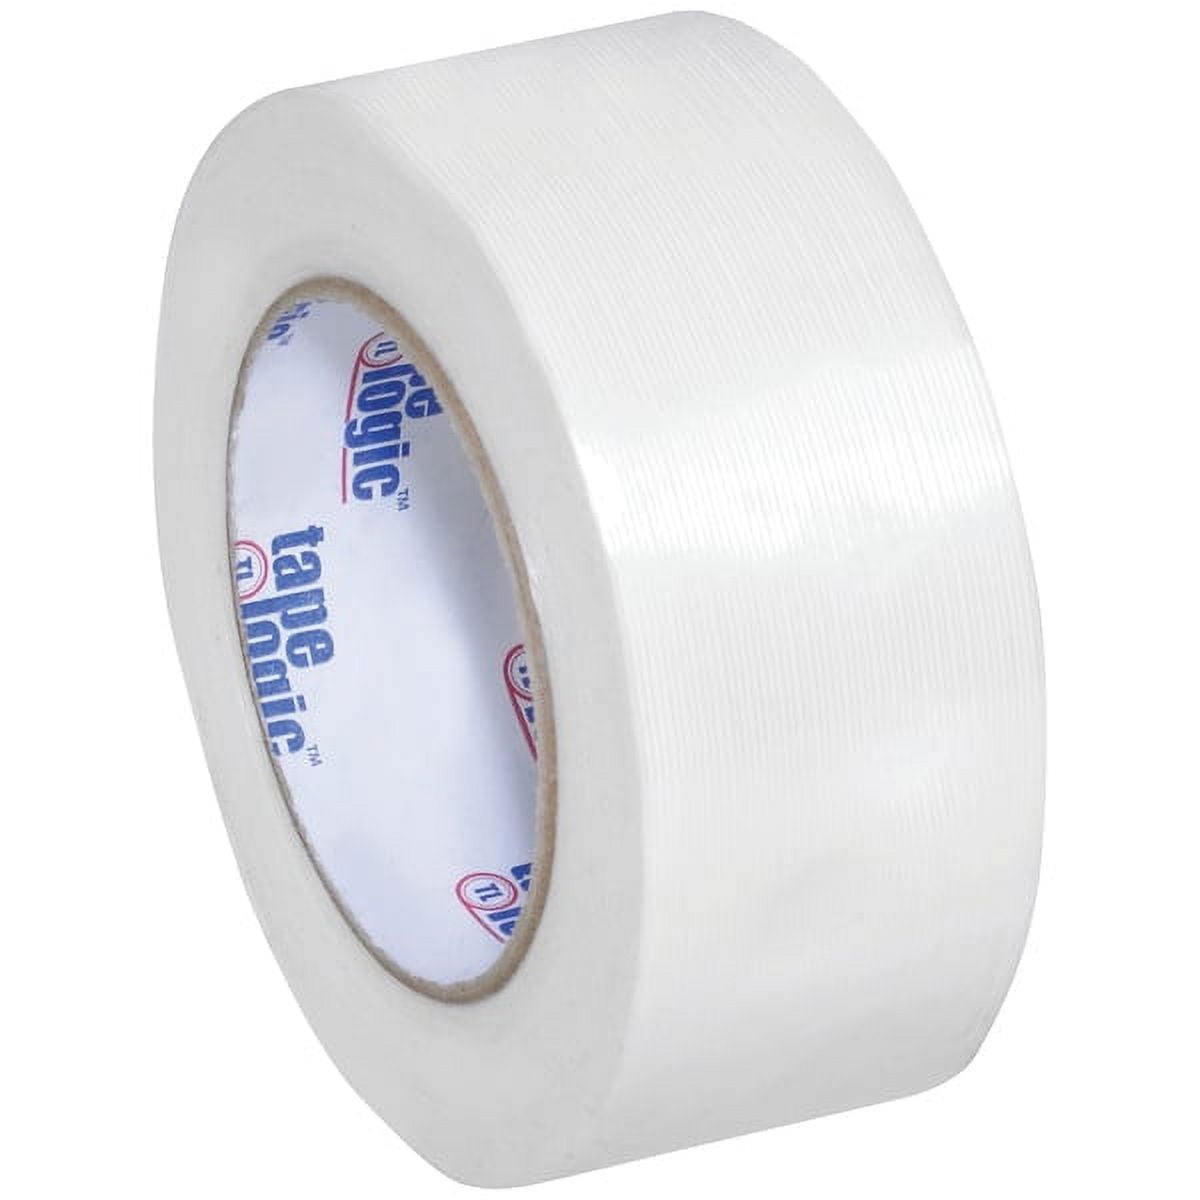 UPC 848109022369 product image for Tape Logic T917140012PK 2 in. x 60 yards 1400 Strapping Tape, Clear - Pack of 12 | upcitemdb.com